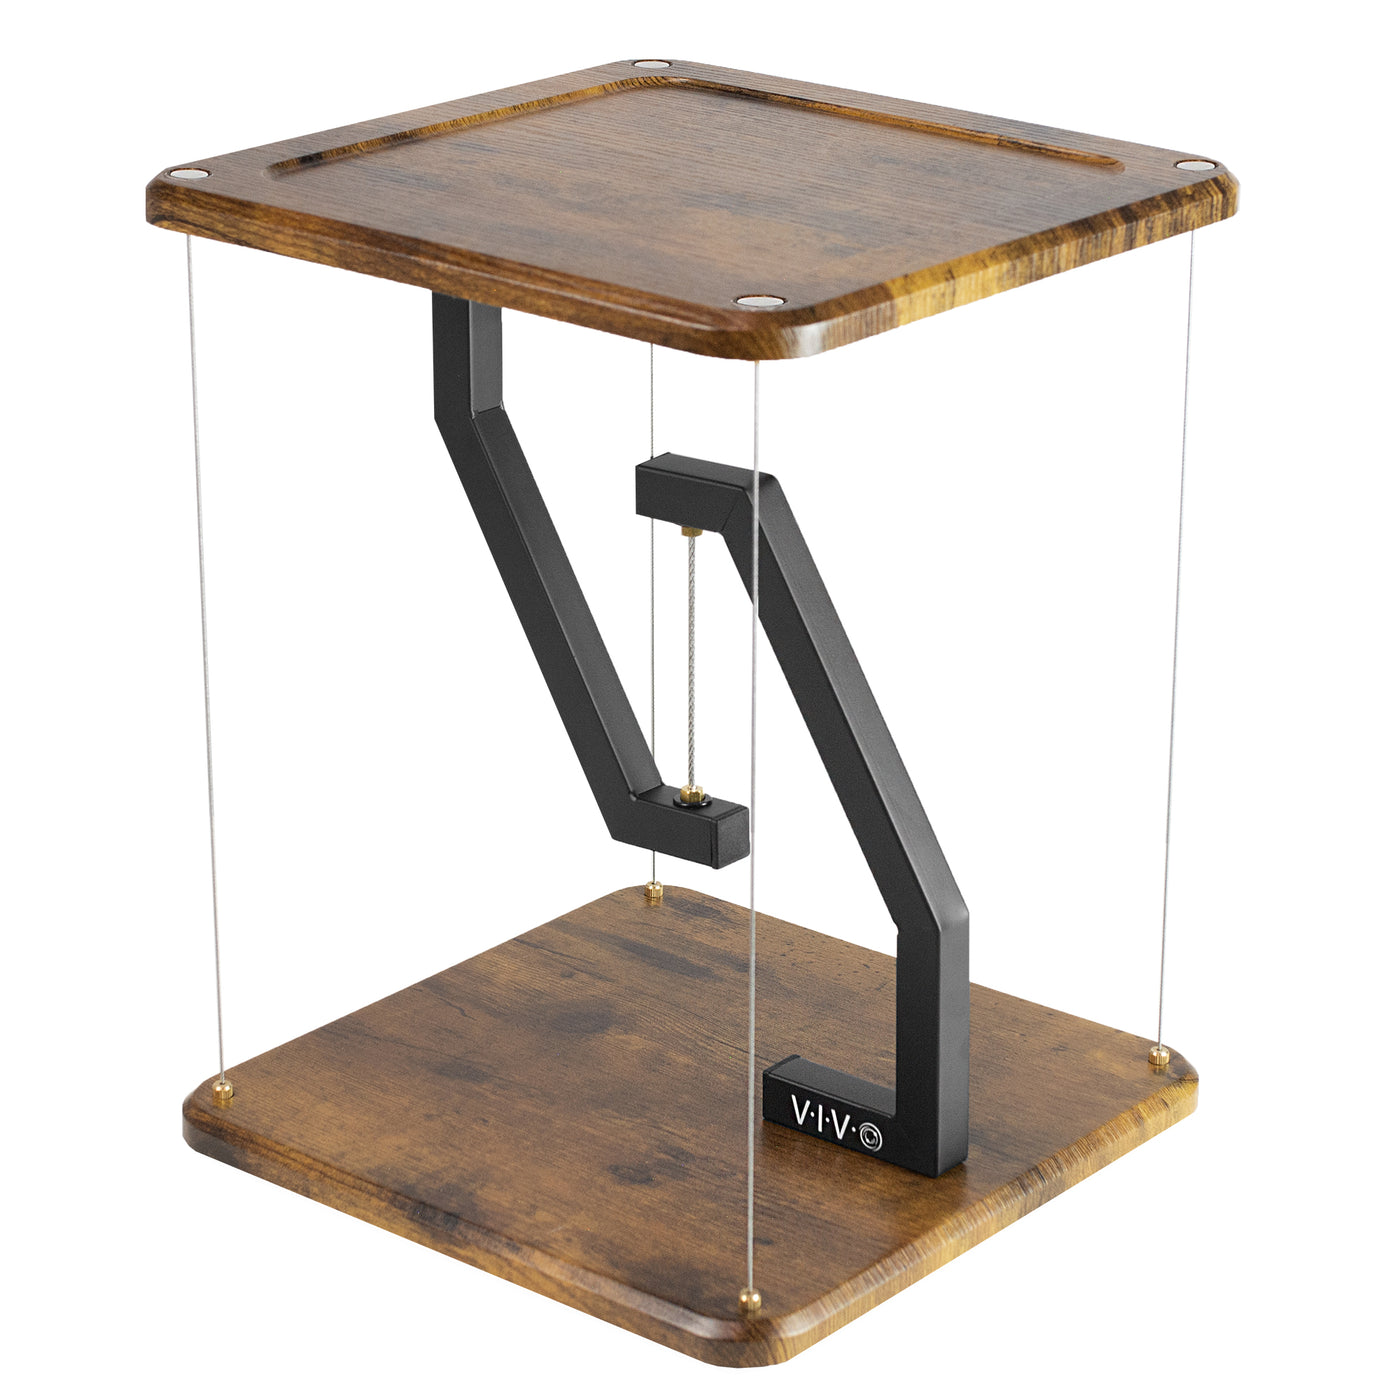 Rustic tensegrity anti-gravity floating speaker stand for improved sound and display.